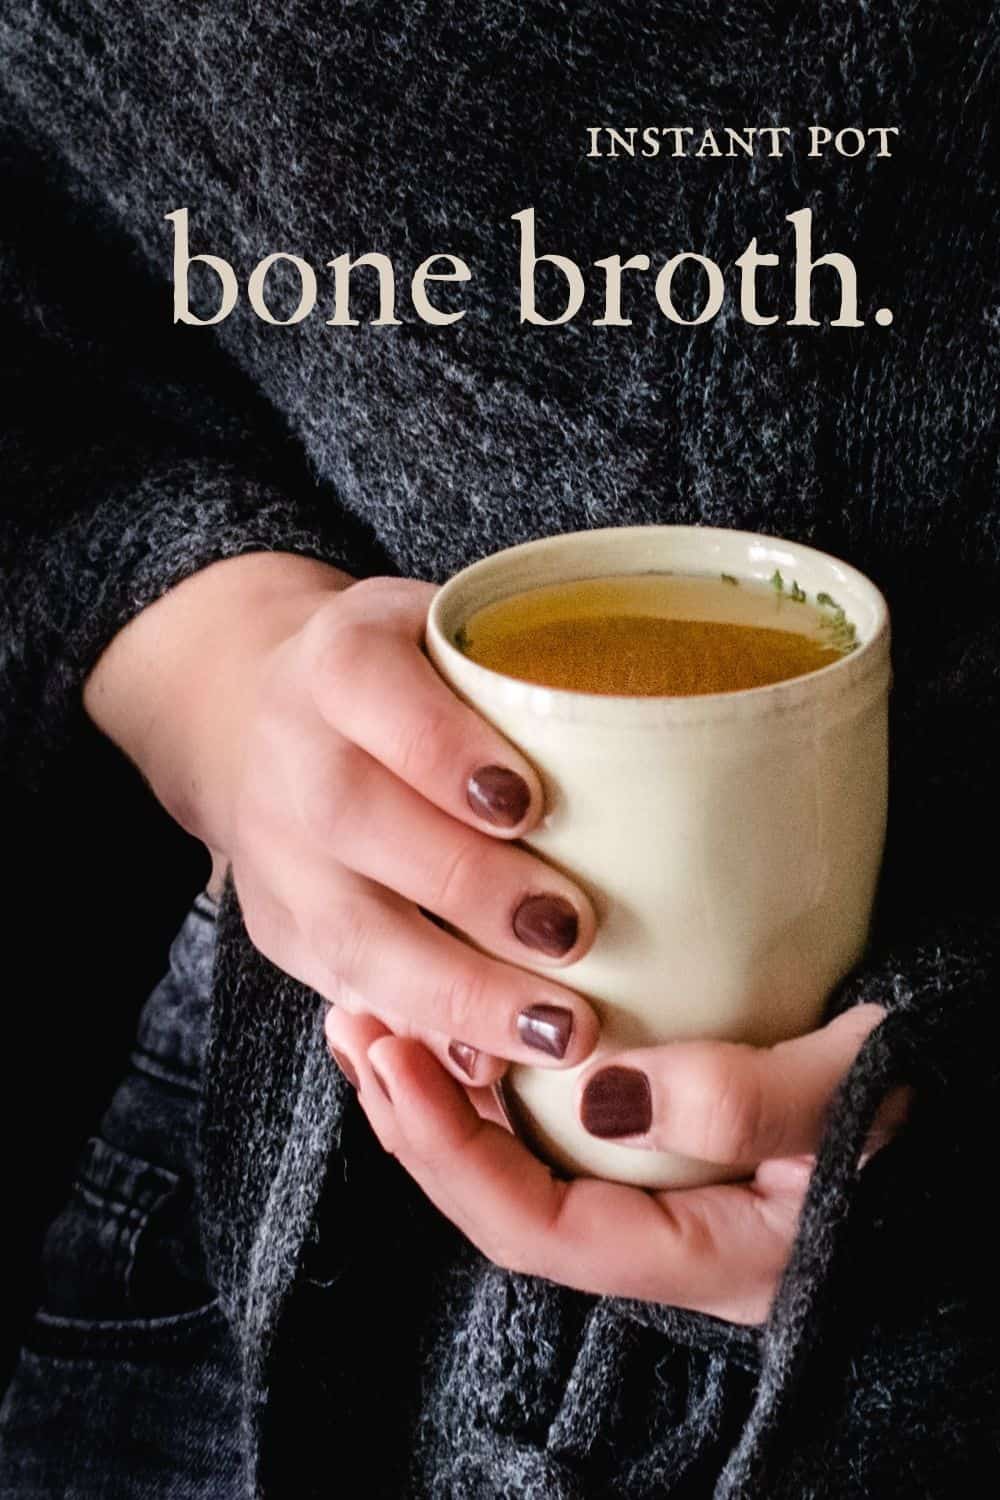 Woman holding a mug with broth sprinkled with herbs.